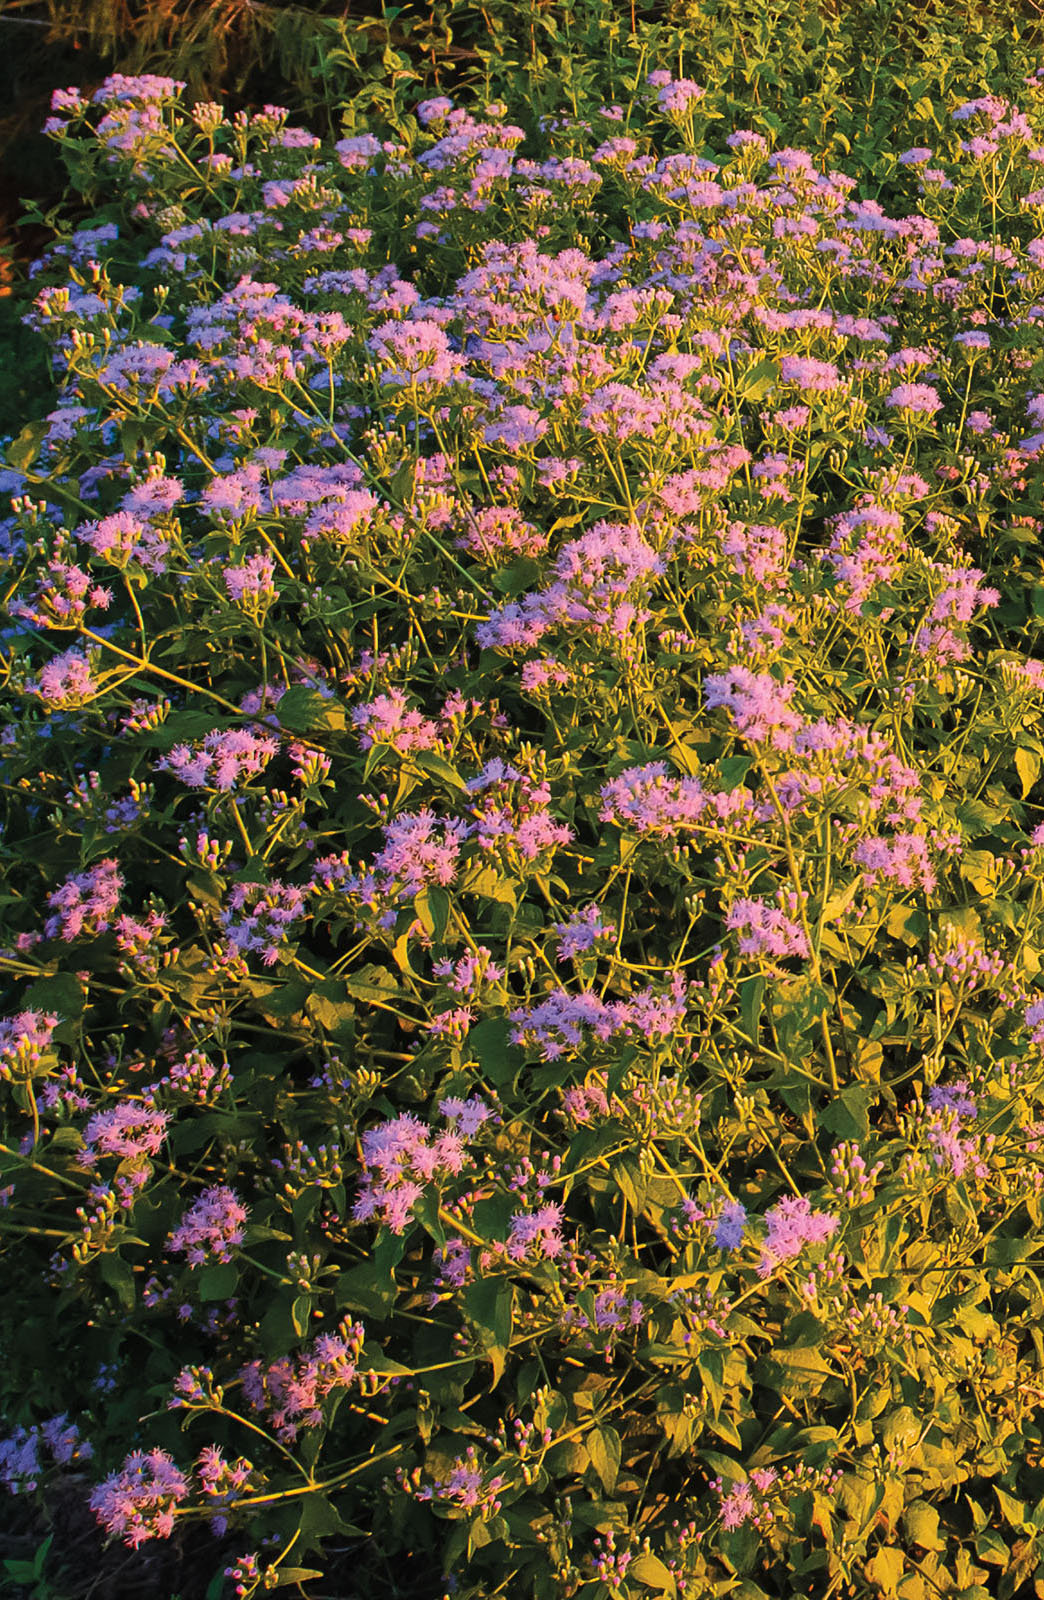 A large collection of purple flowers adorn a bush-like plant next to green grass